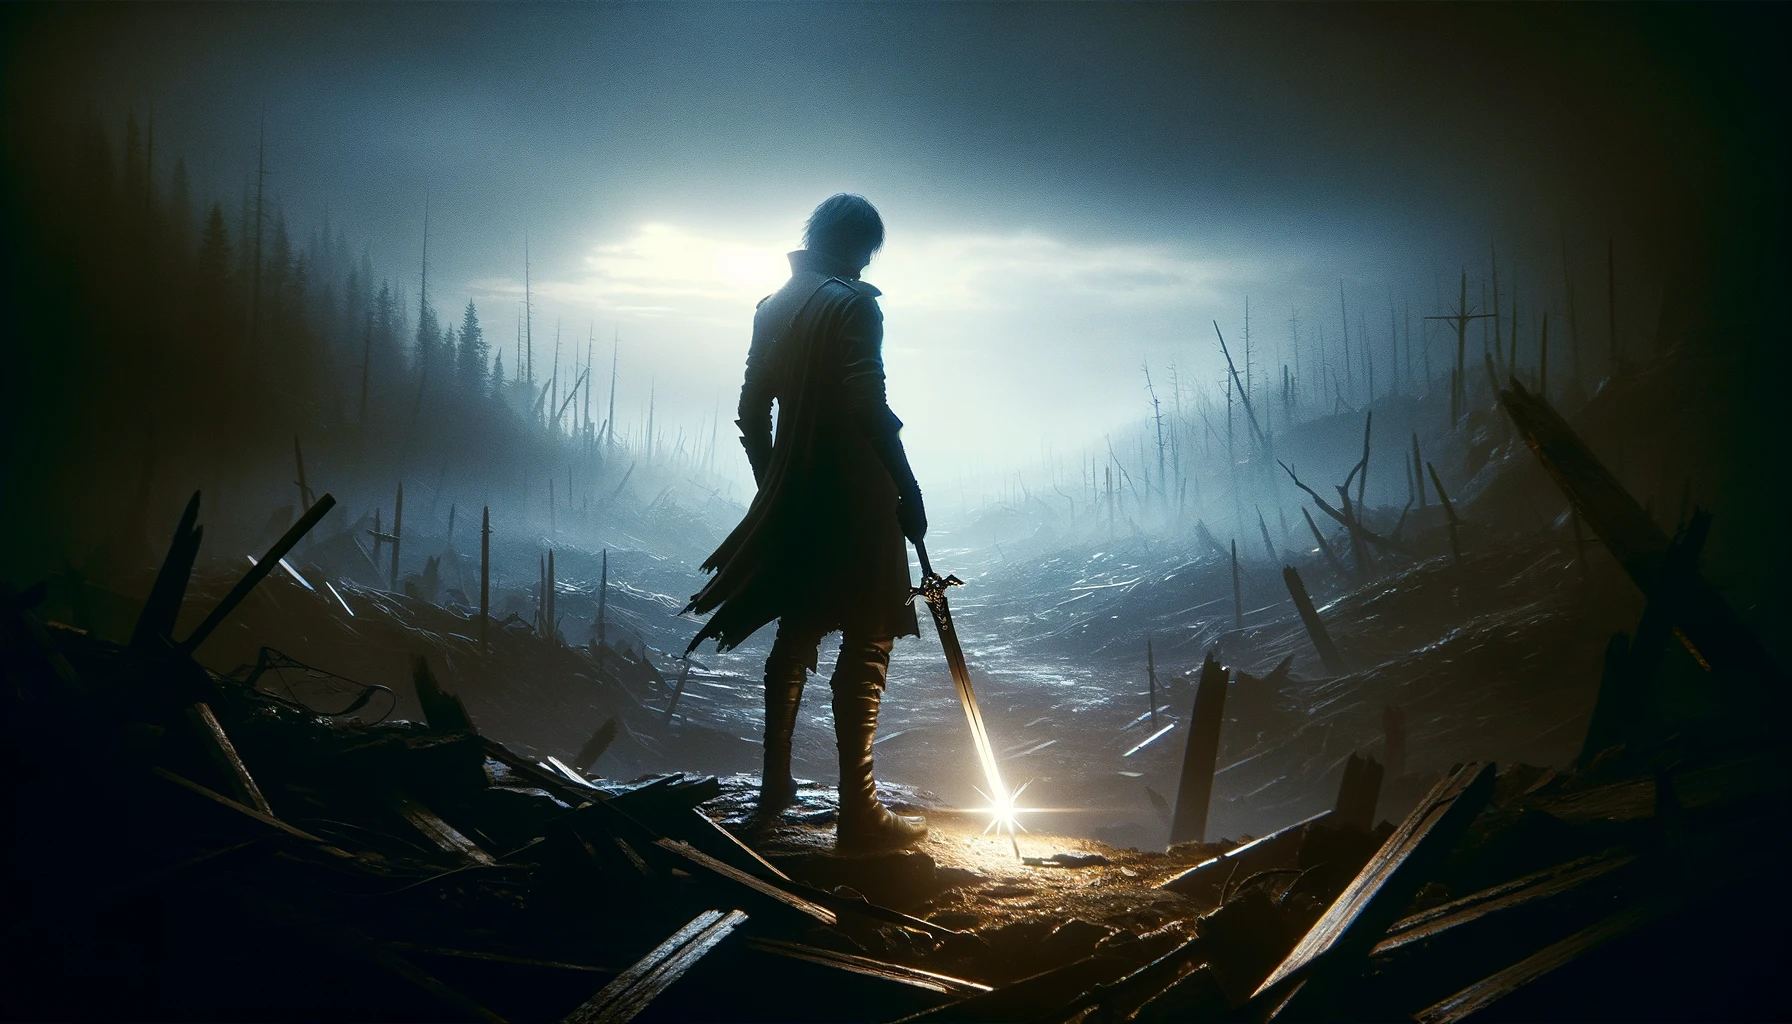 a 169 image featuring a solitary figure standing tall amidst a desolate battlefield The setting should be eerie and desolate with remnants of a recent battle visible in the back